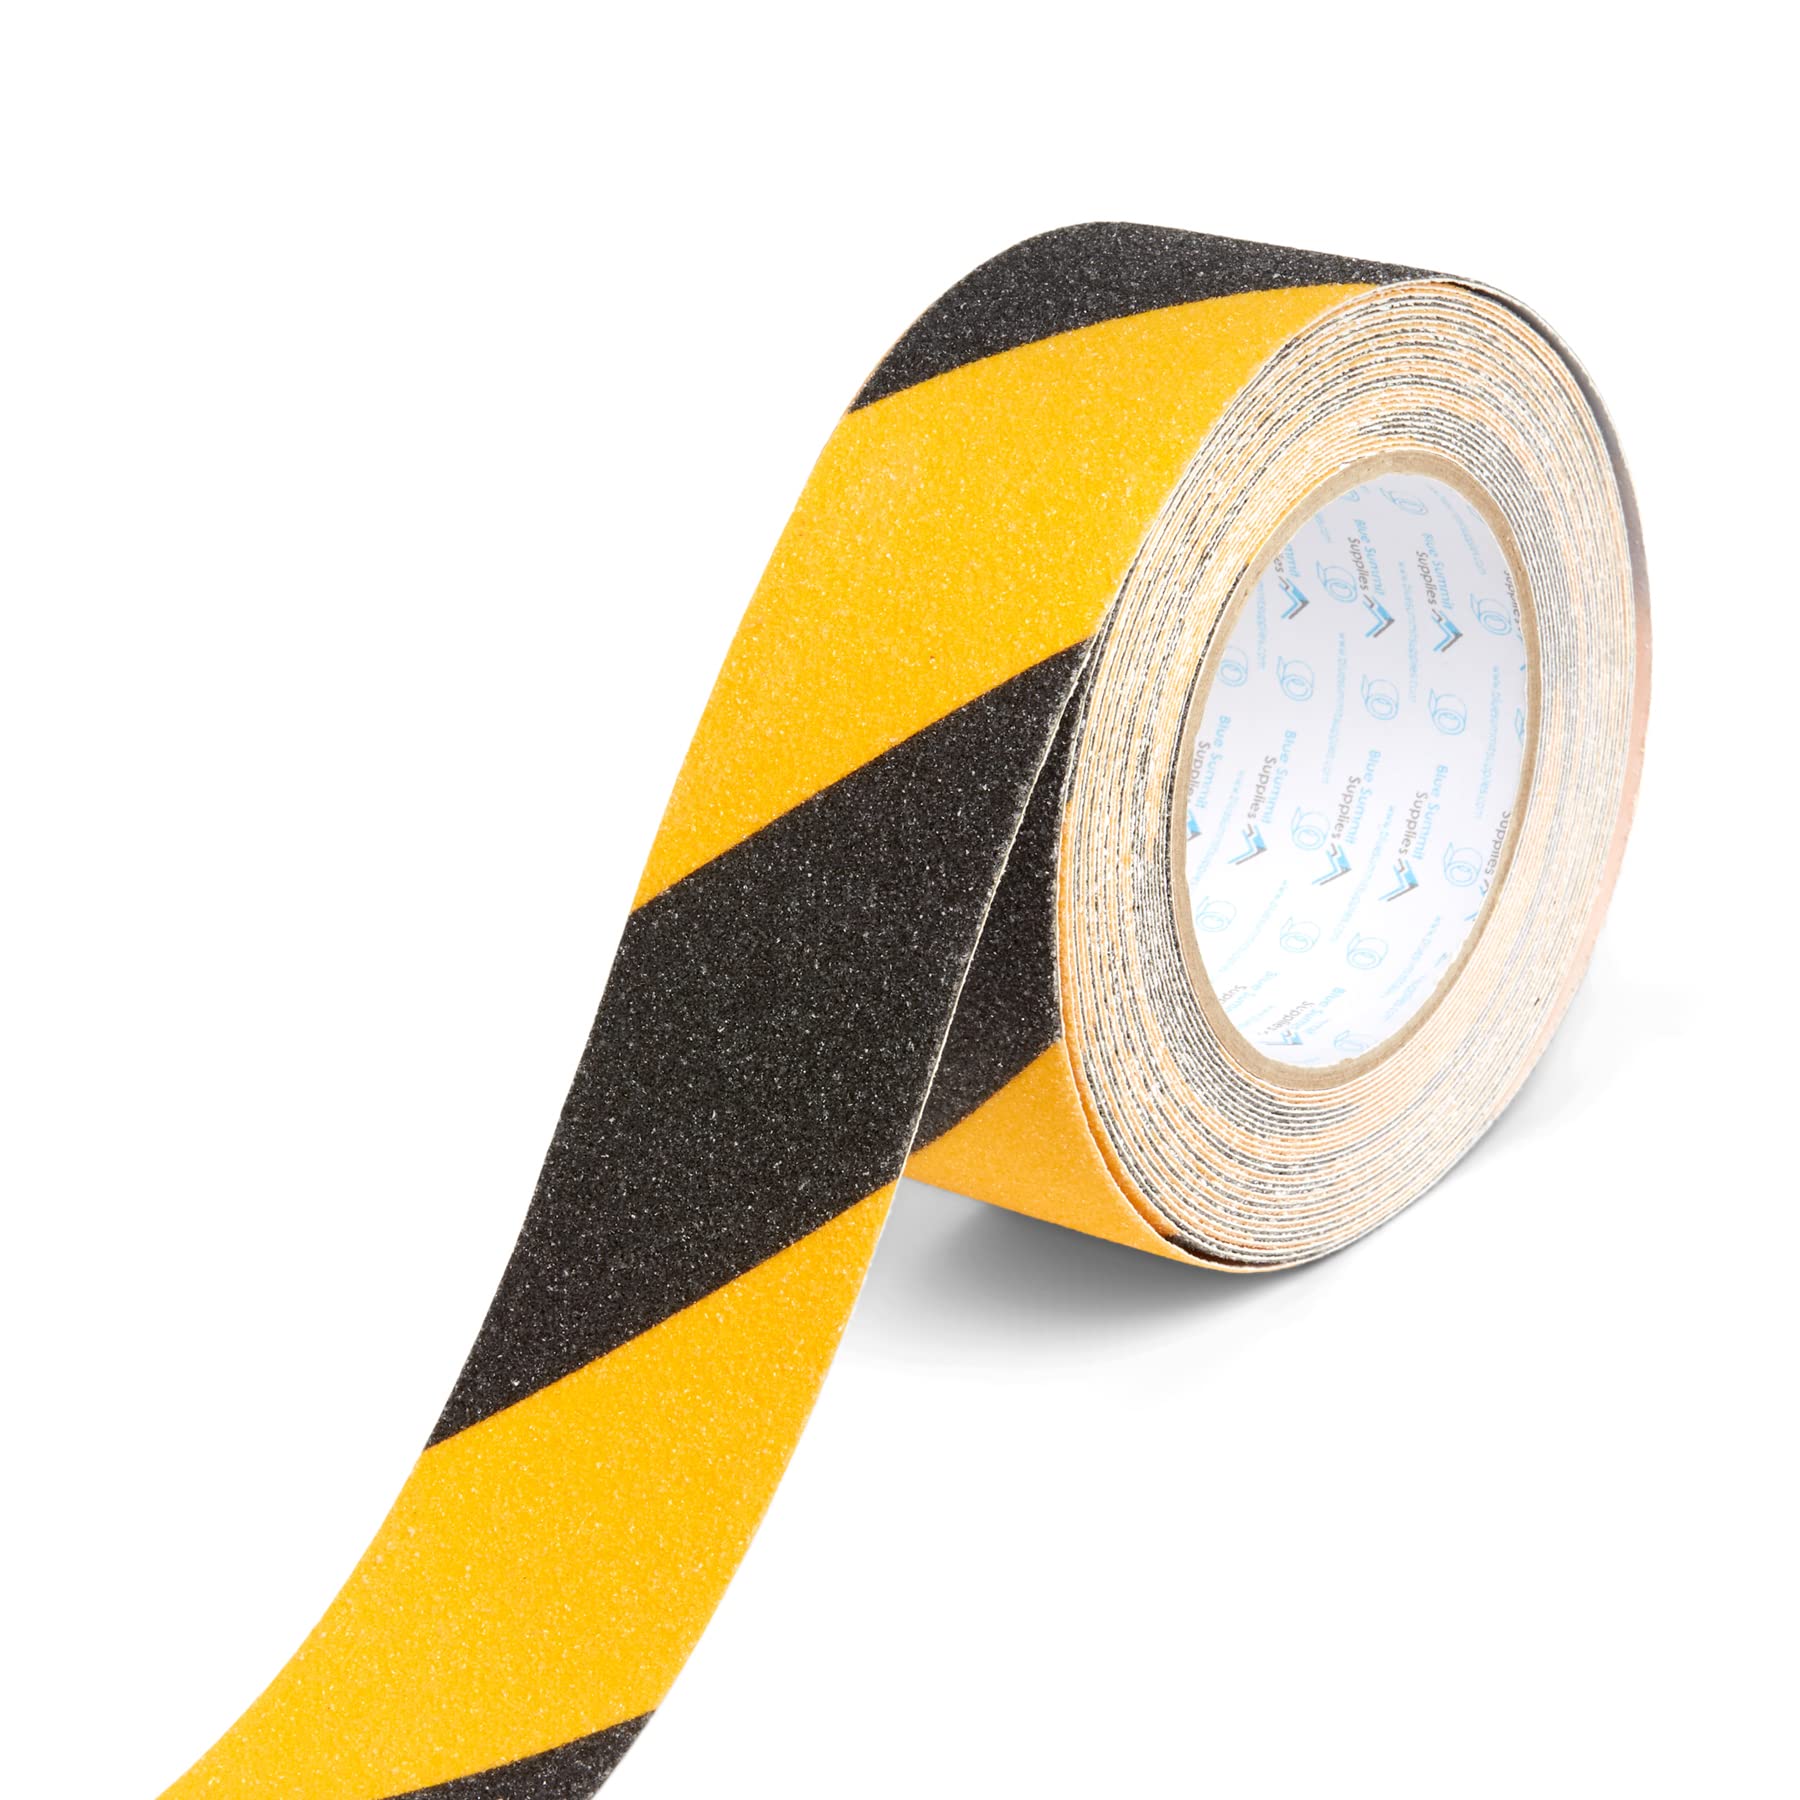 Blue Summit Supplies Anti Slip Tread Tape, 2 inch x 30 feet, Black and Yellow Stripe, Non Skid Safety Step Tread with Nonslip Grip, Provides Step Traction for Facility Safety, 2 Pack, 60 Feet Total